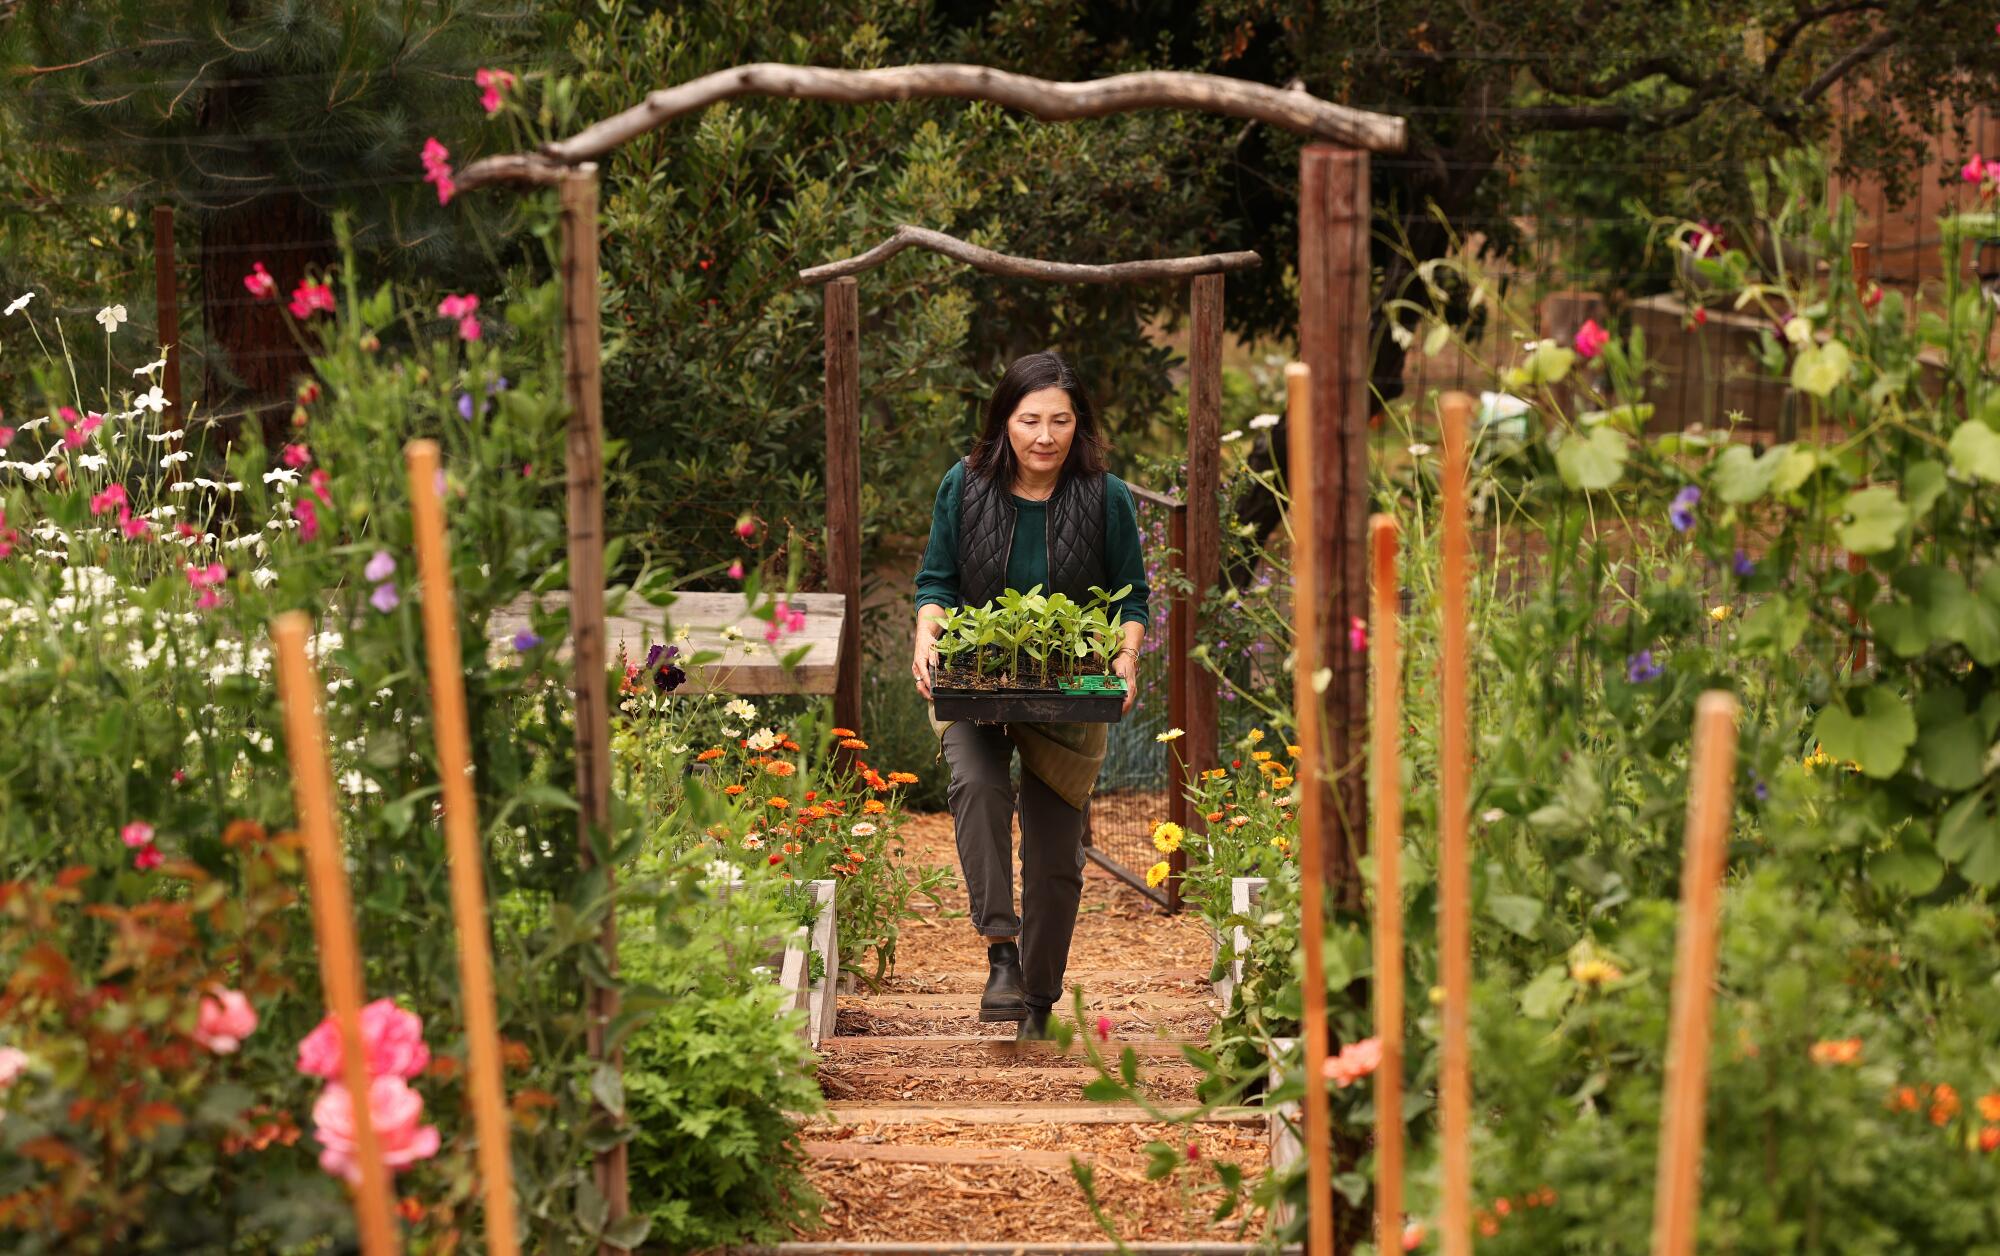 Ferguson carries zinnias she grew from seeds up the stairs of her hillside garden.